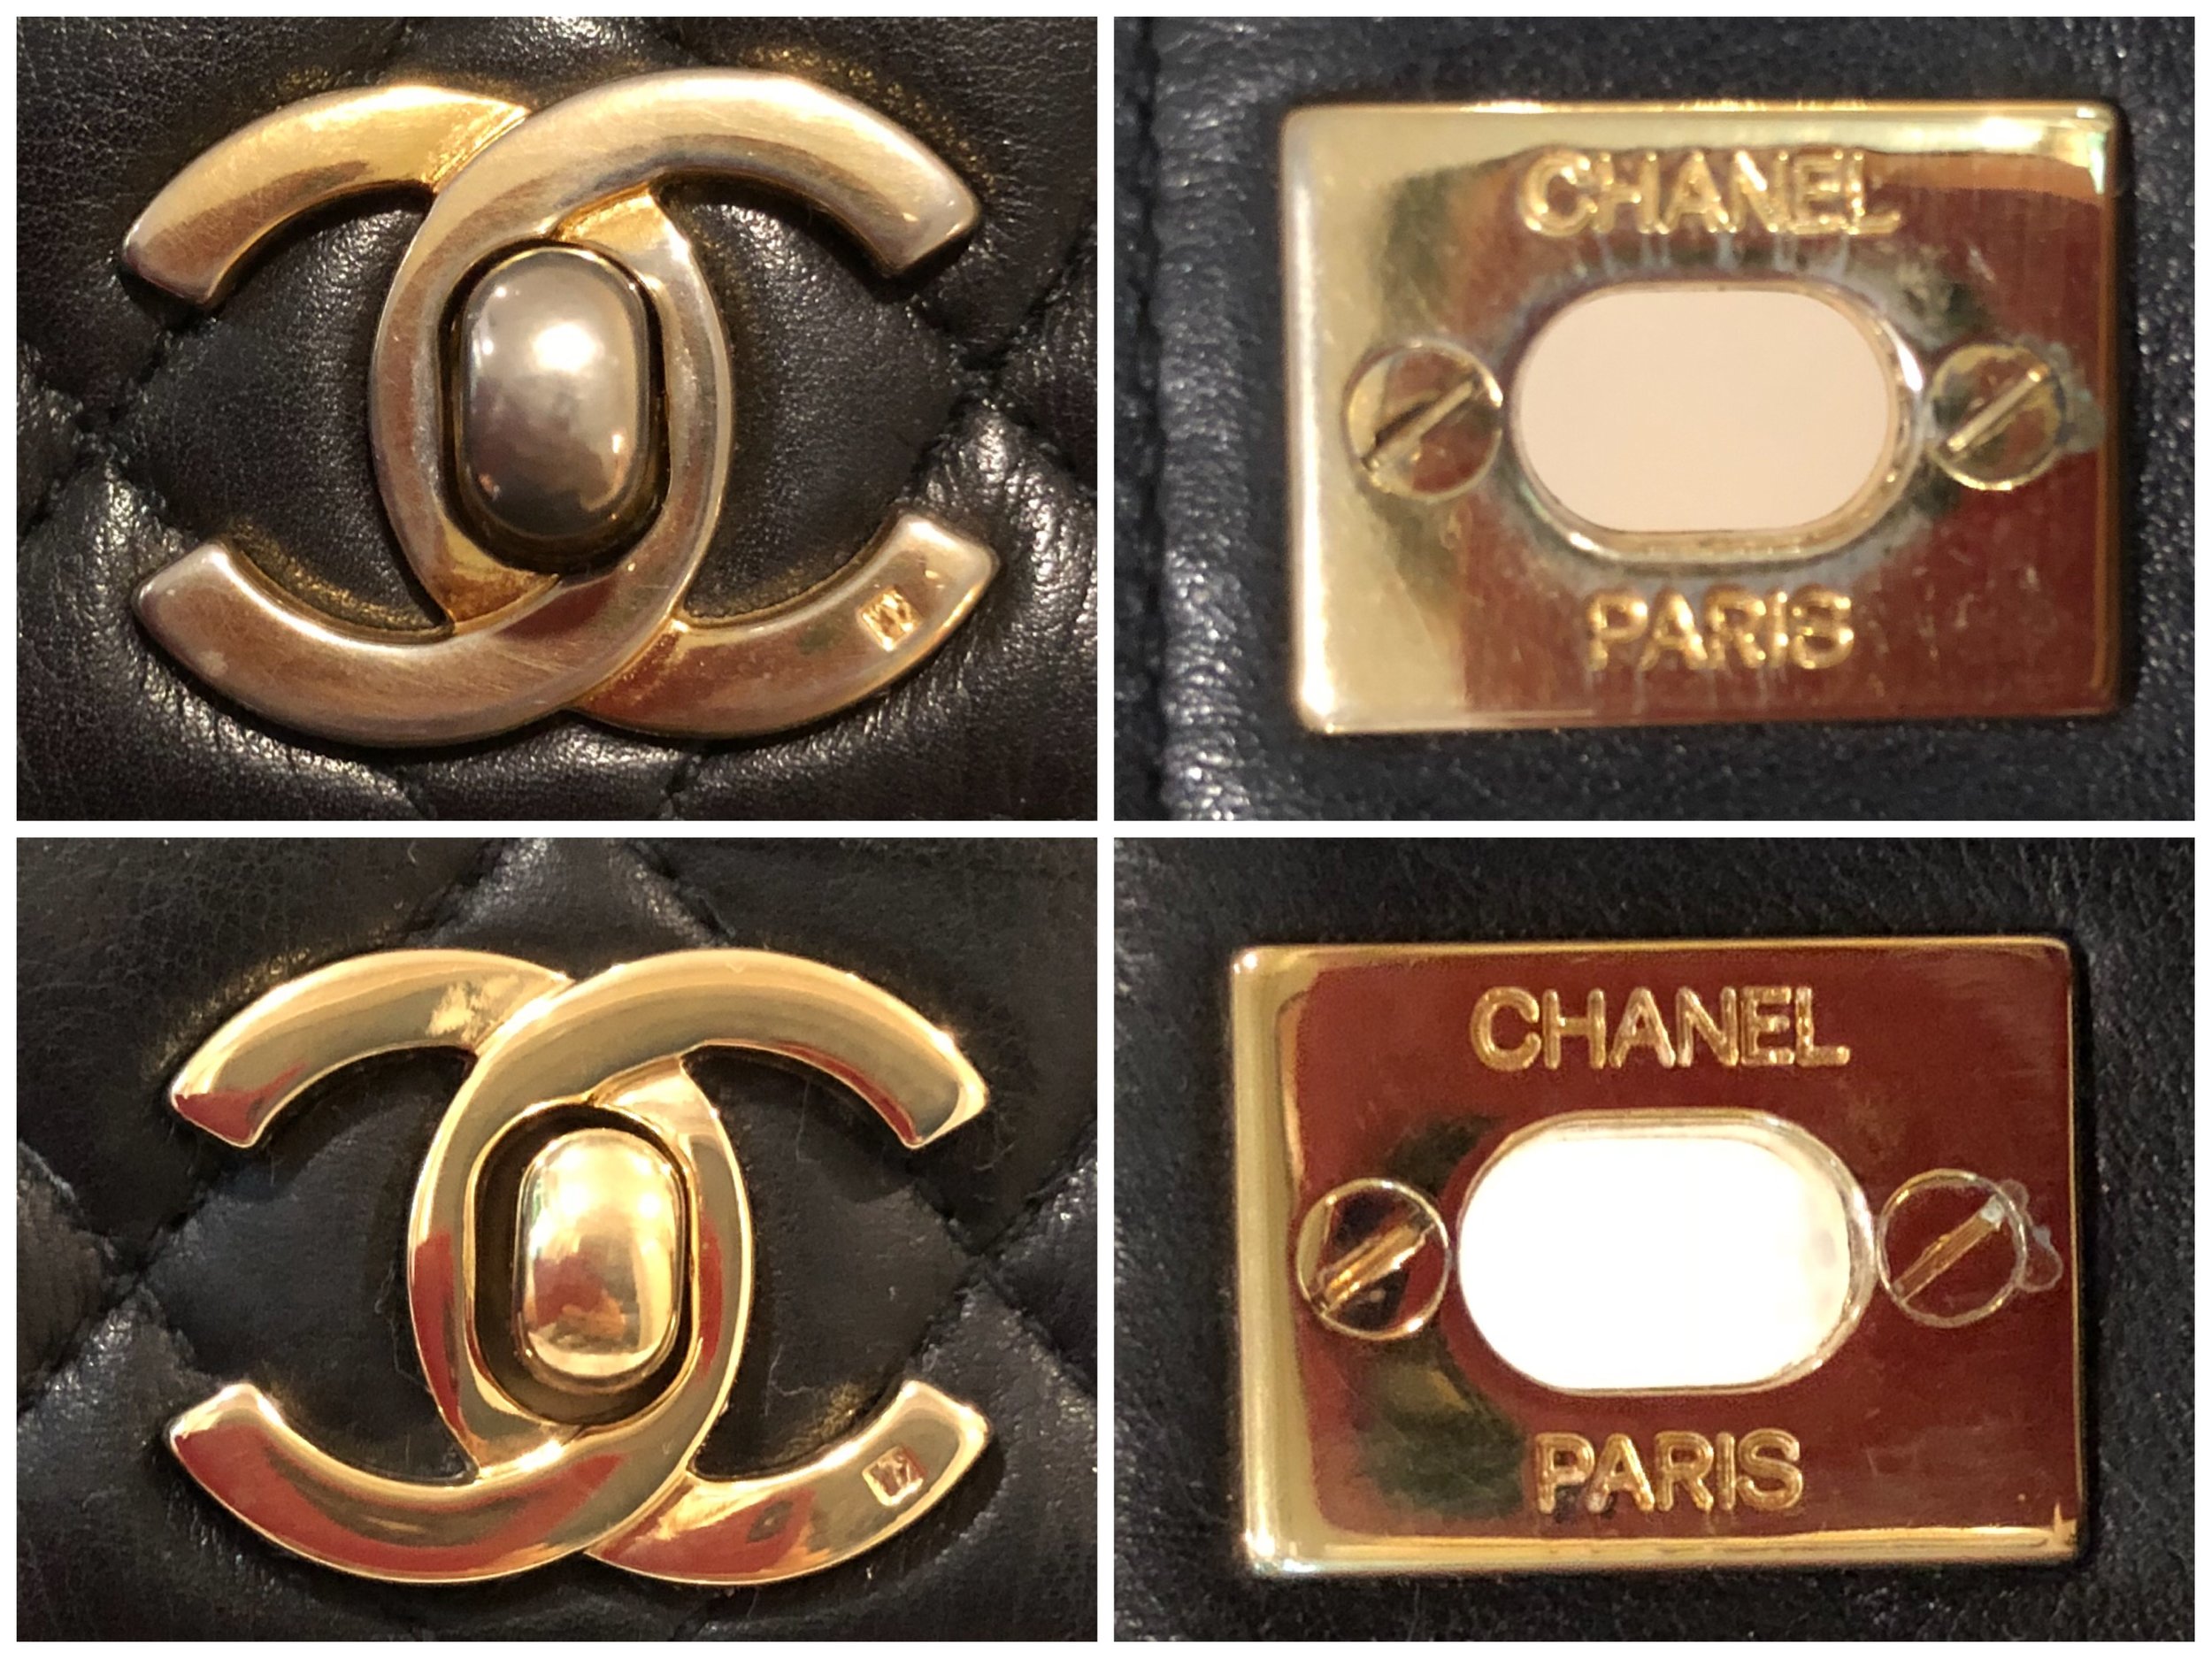 LVMH, L'Oréal and Chanel Have Lock on Employment Appeal